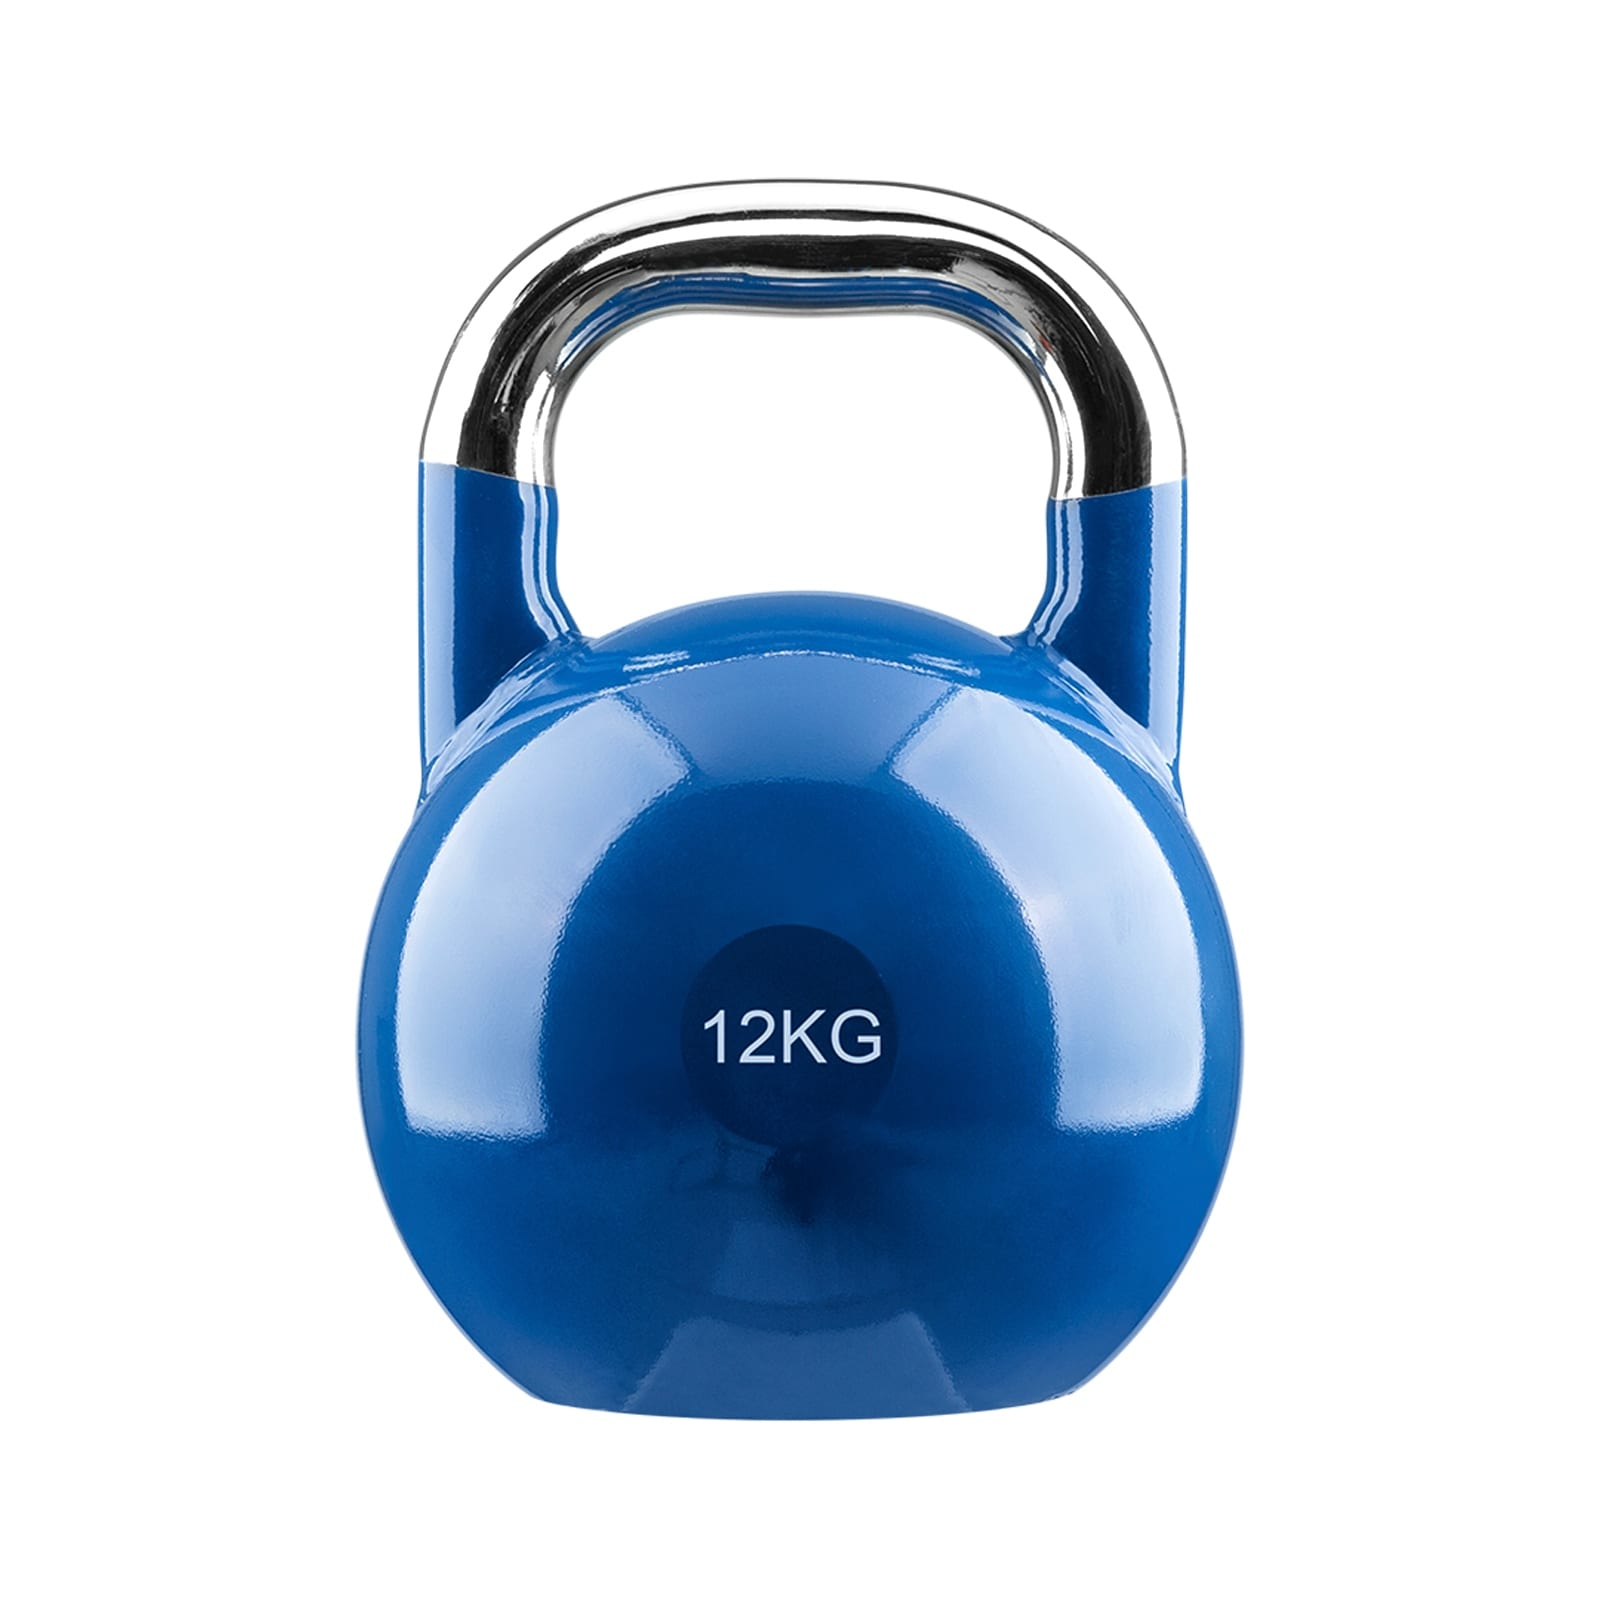 VENTRAY HOME Steel Kettlebell, Competition Kettle Bell for Weight